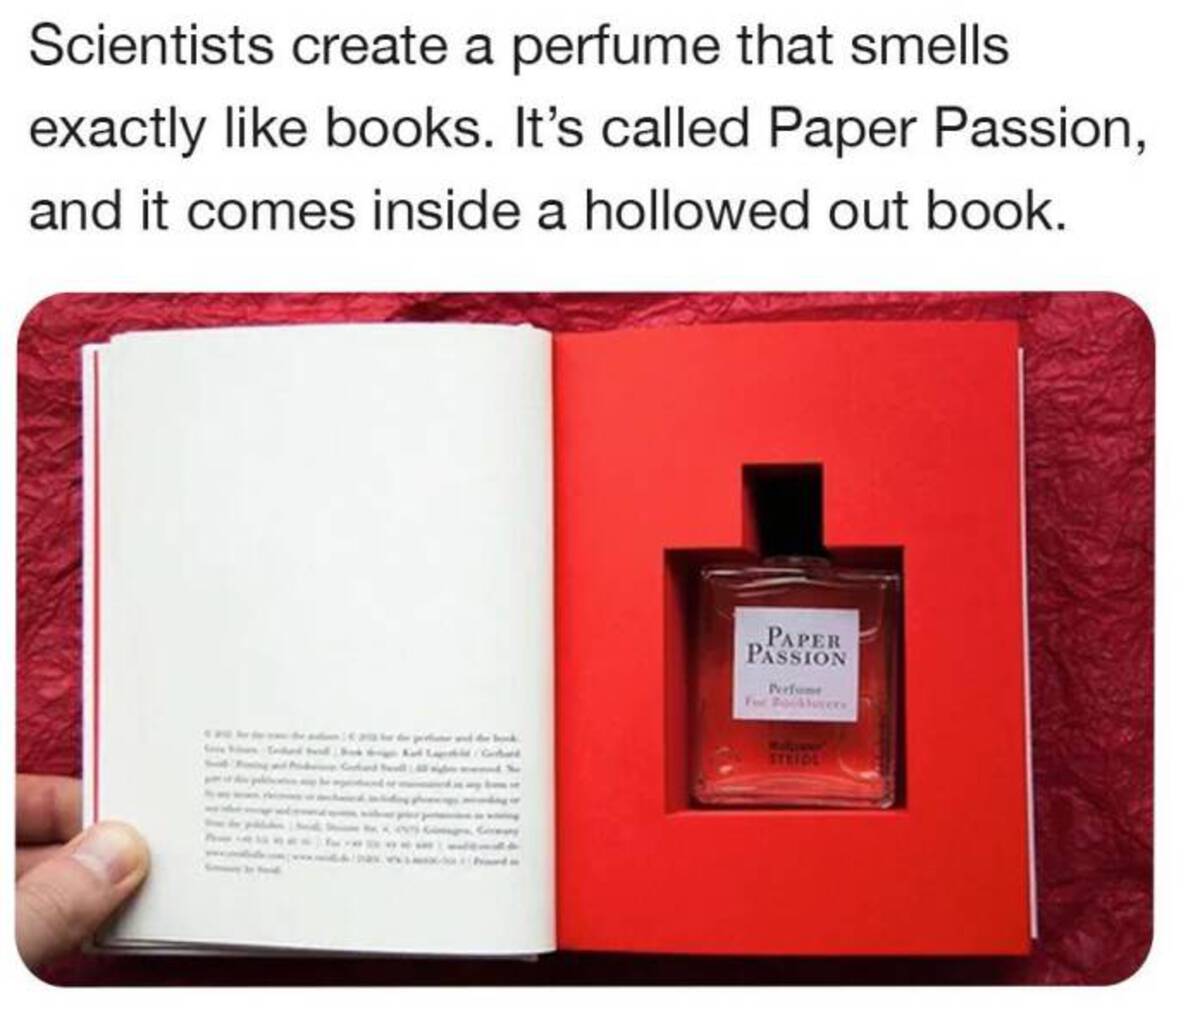 picture frame - Scientists create a perfume that smells exactly books. It's called Paper Passion, and it comes inside a hollowed out book. Paper Passion Perfume For Proce Stride